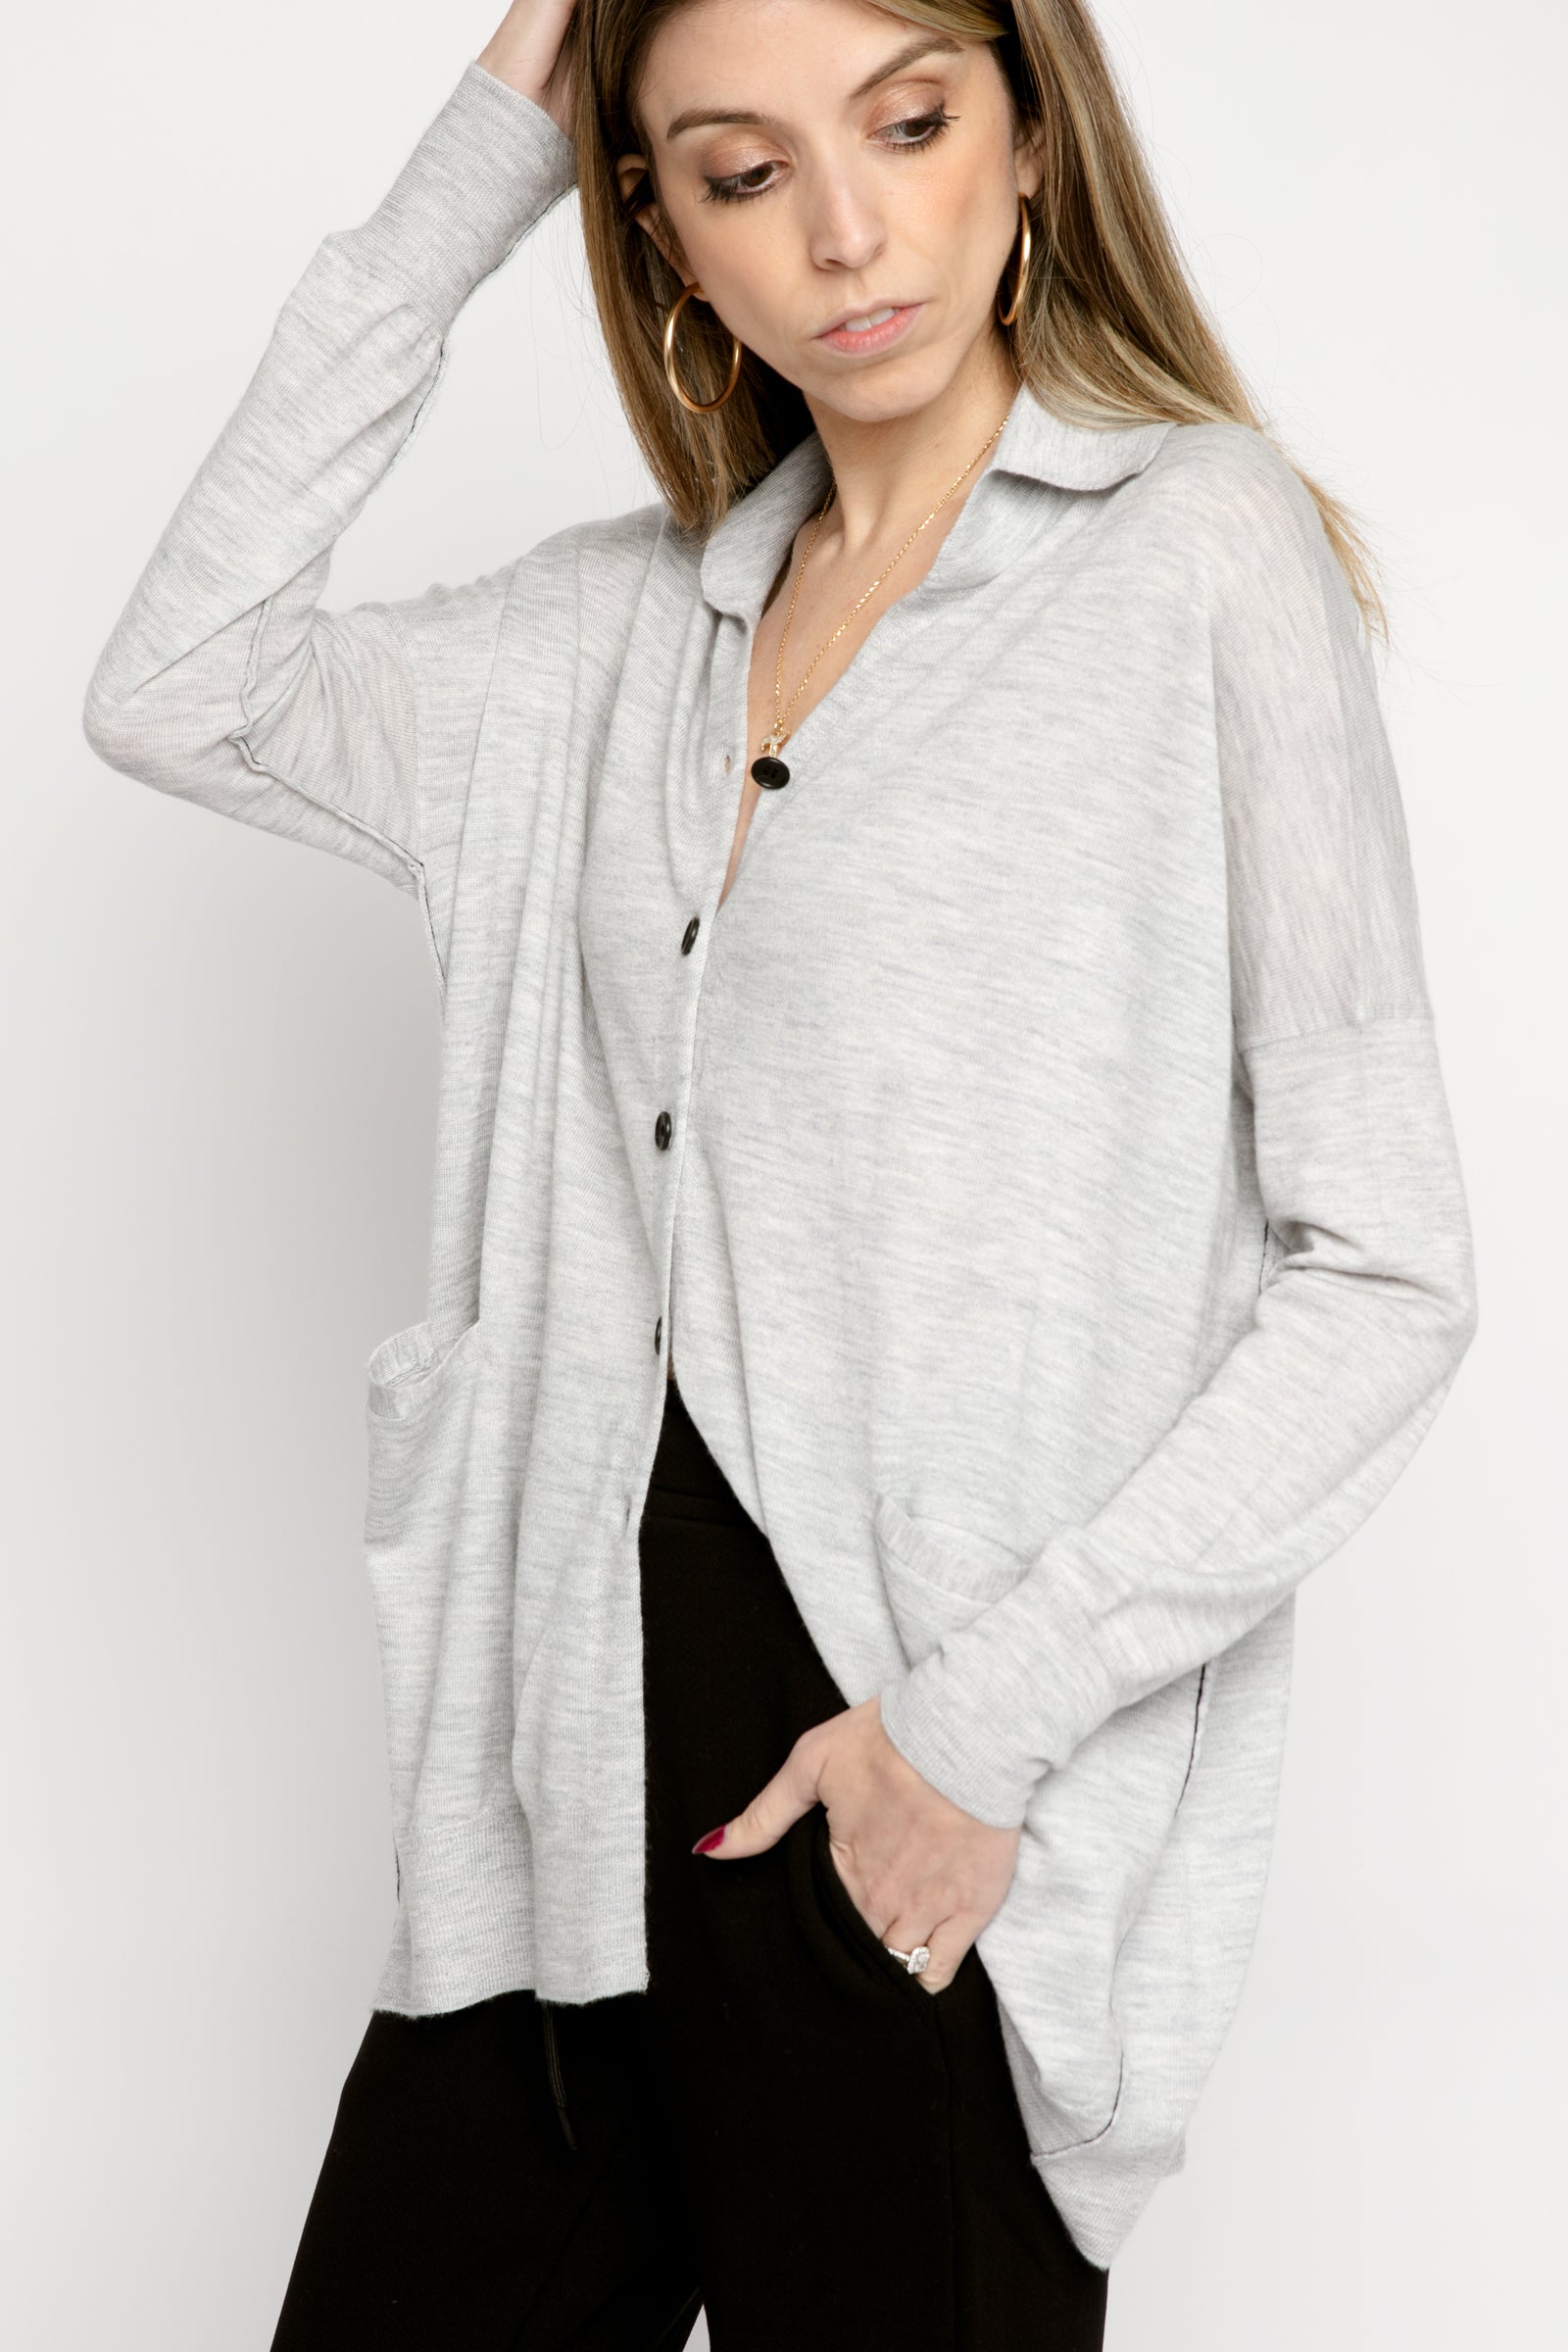 PAYCHI GUH Collared Cardigan in Pale Heather Grey